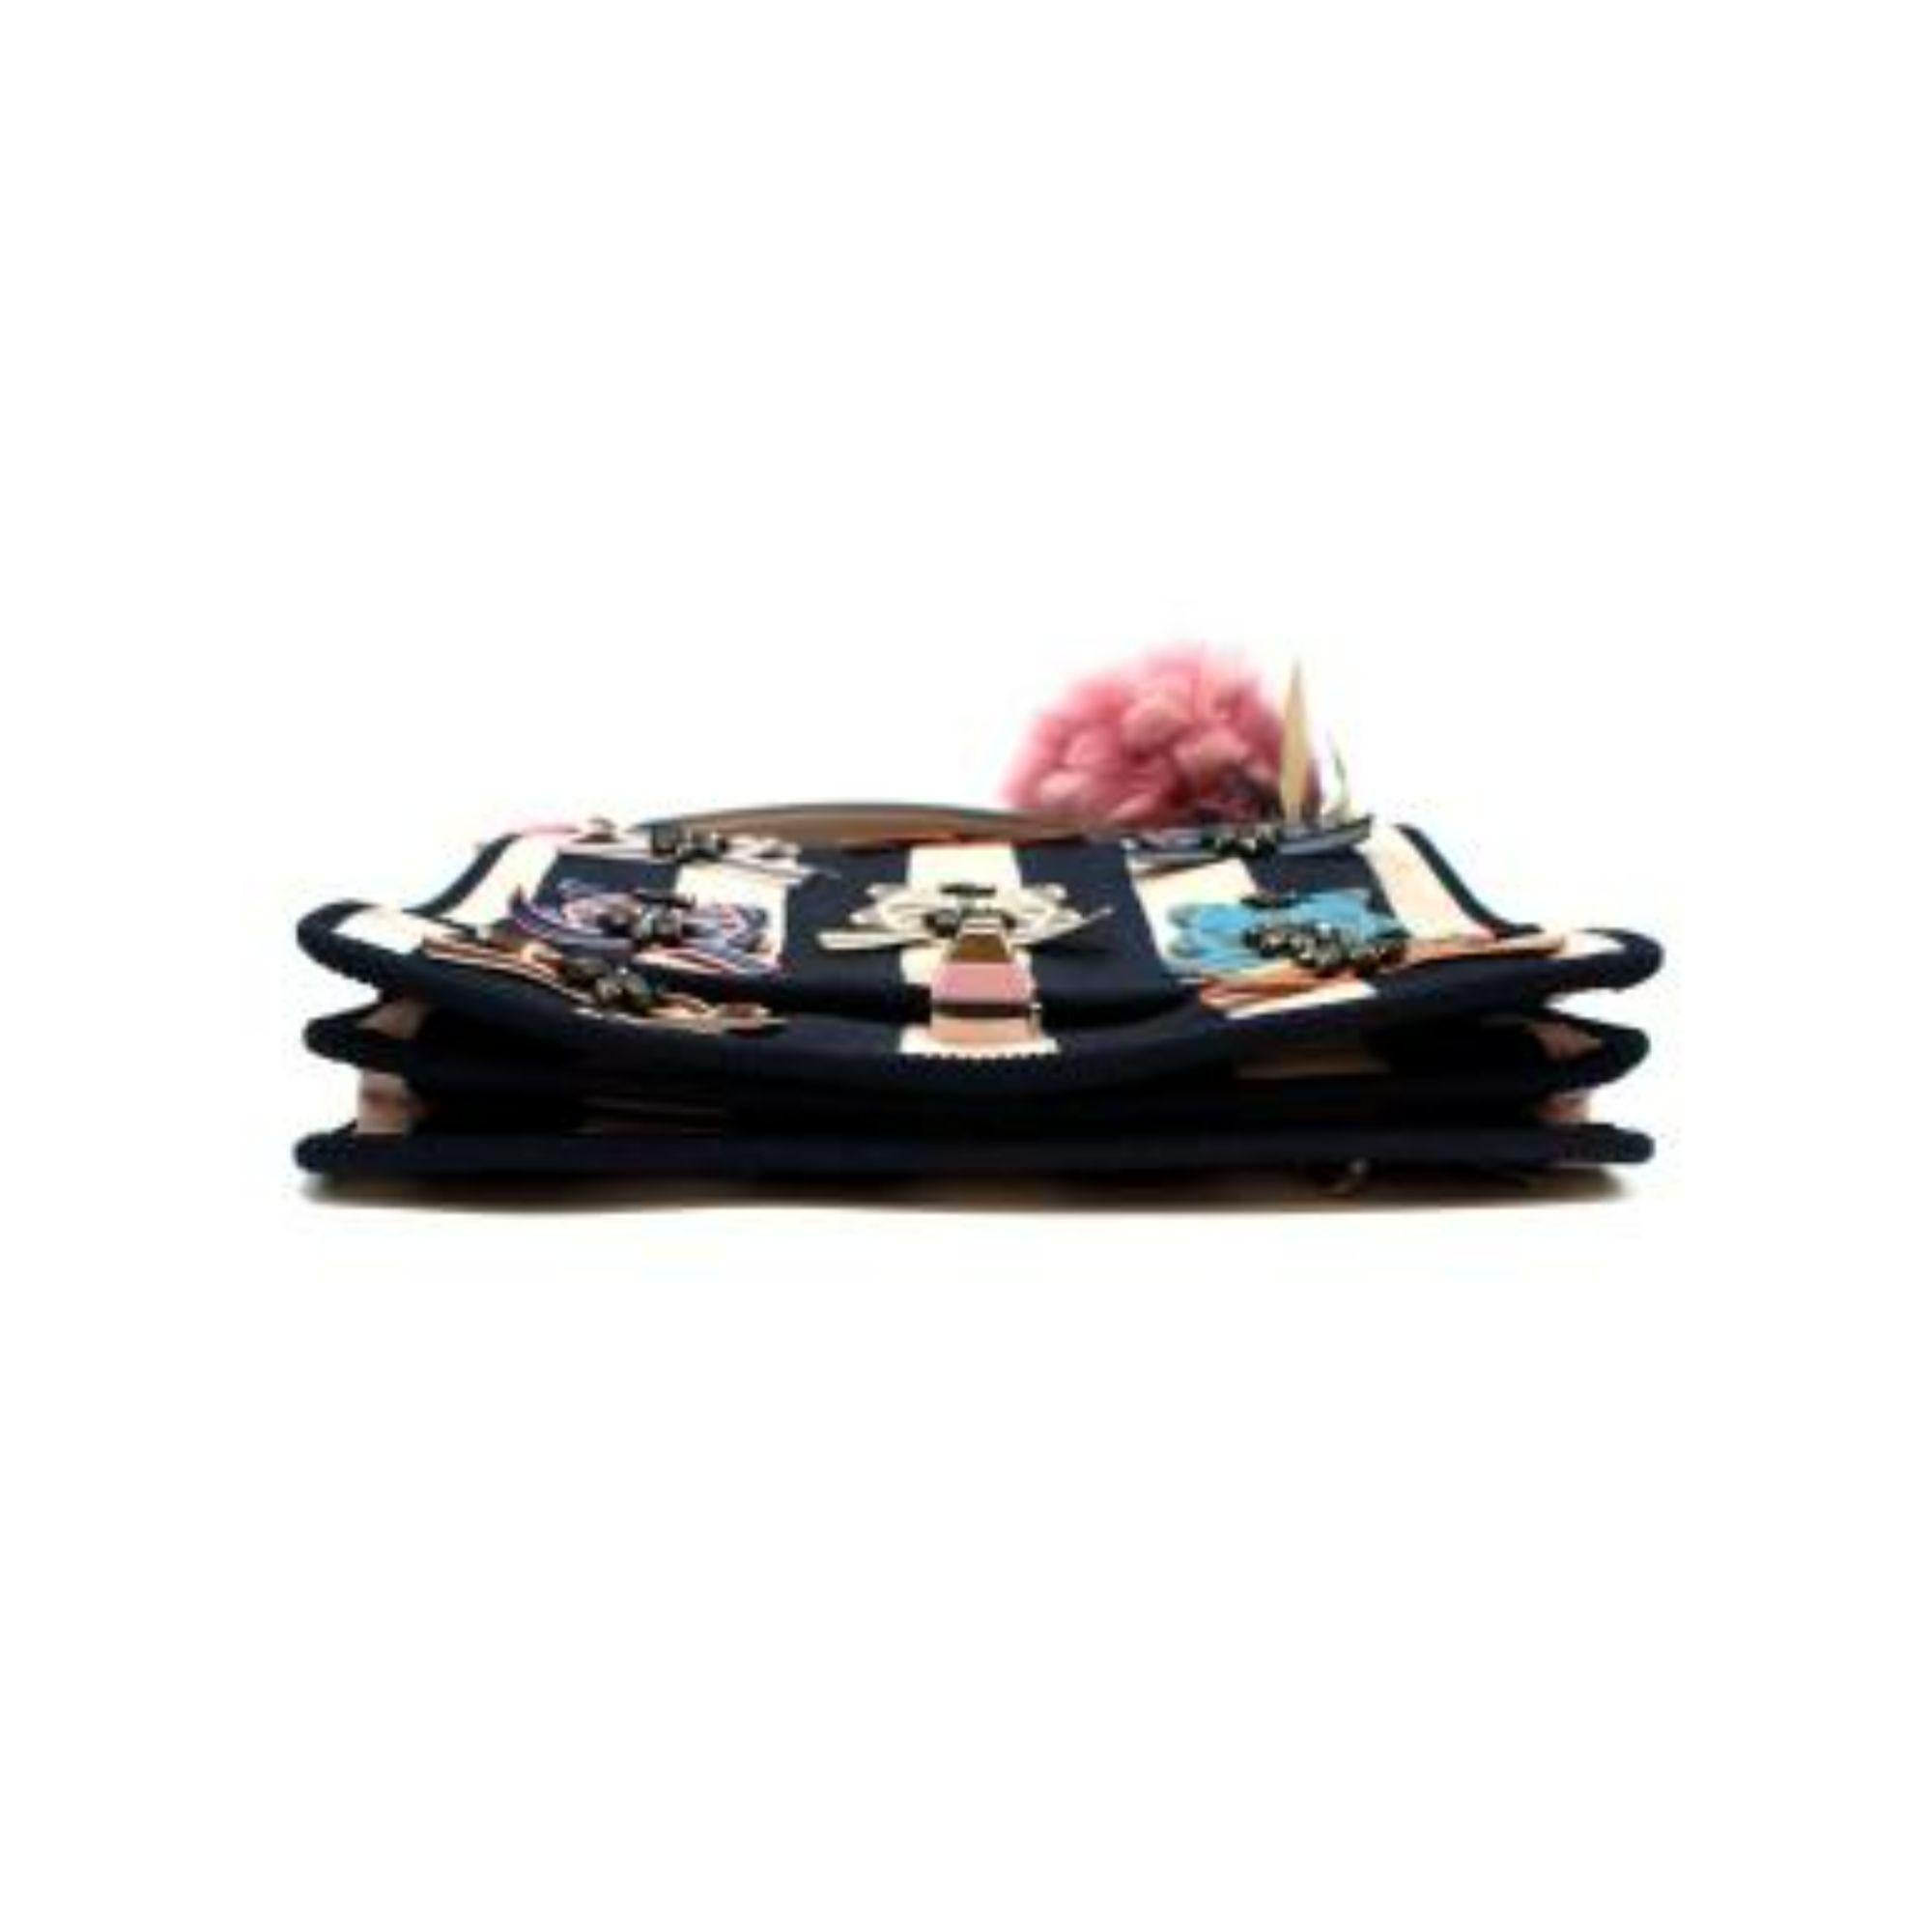 Fendi Bow detail stripe bag

- Two asymmetric colorful pattern handles
- Bow detailing throughout
- Striped body canvas
- Pink fur ball attached detail
- Clasp fastening
- Two interior compartments
- One interior slip pocket
- Crystal-embellished